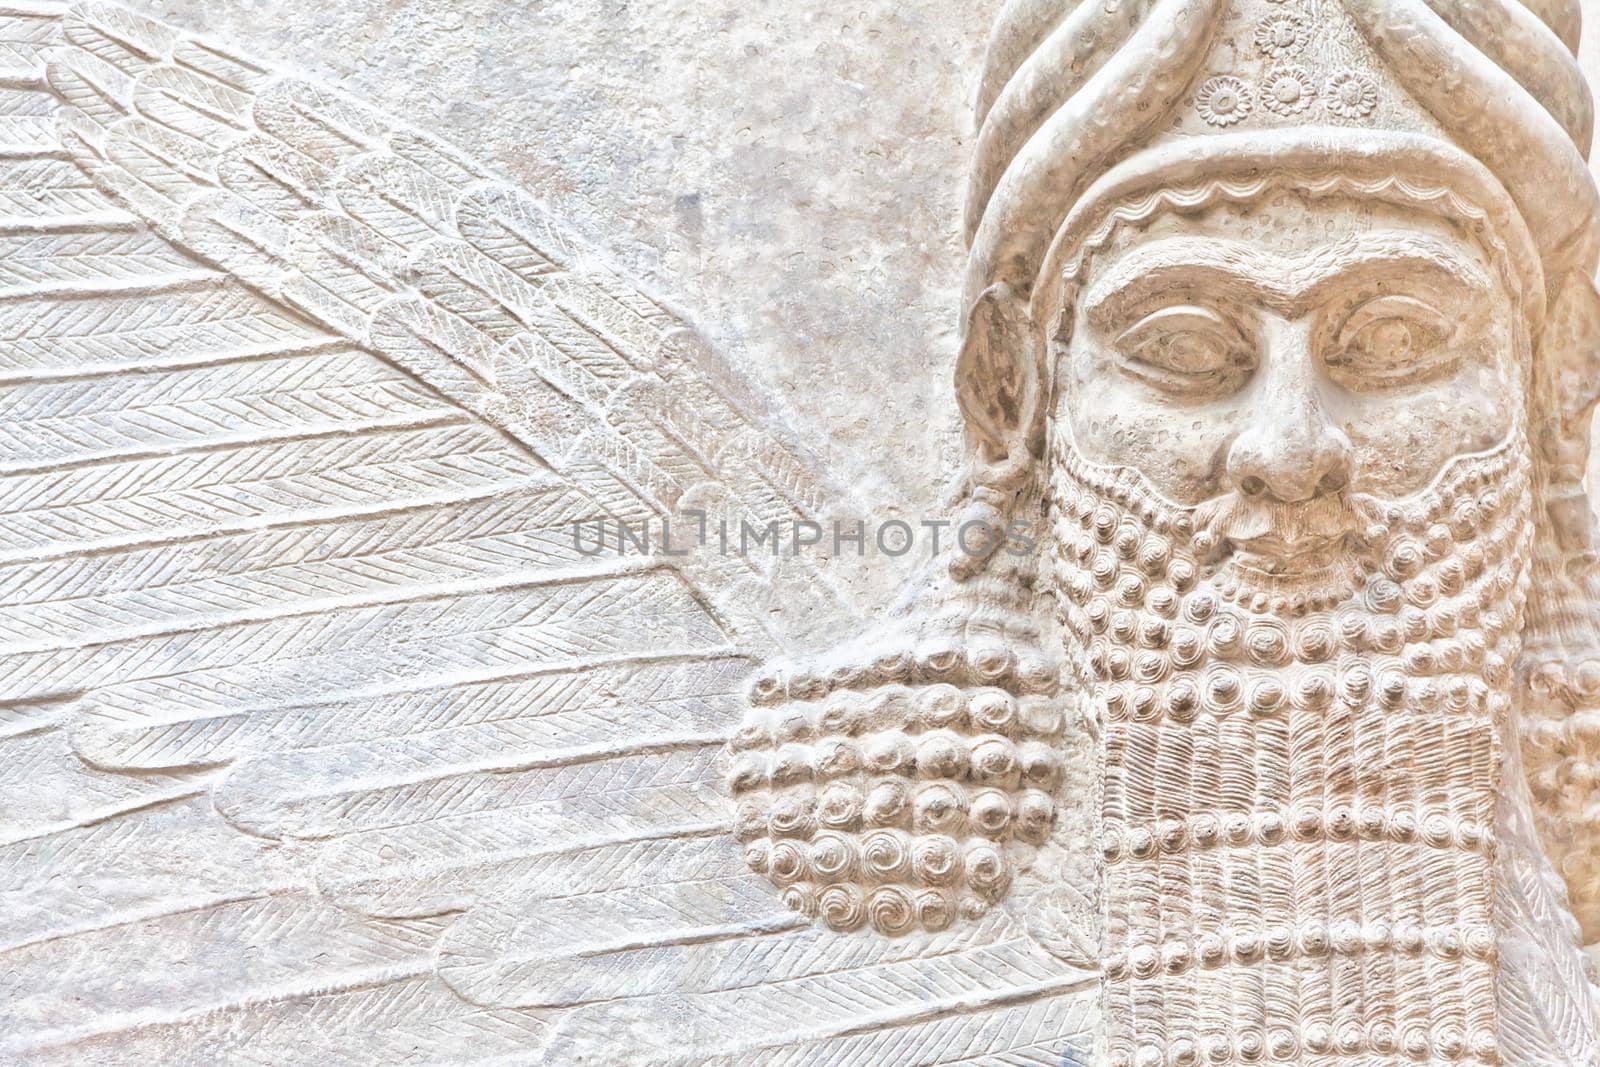 Mesopotamian art was intended to serve as a way to glorify powerful rulers and their connection to divinity by Perseomedusa